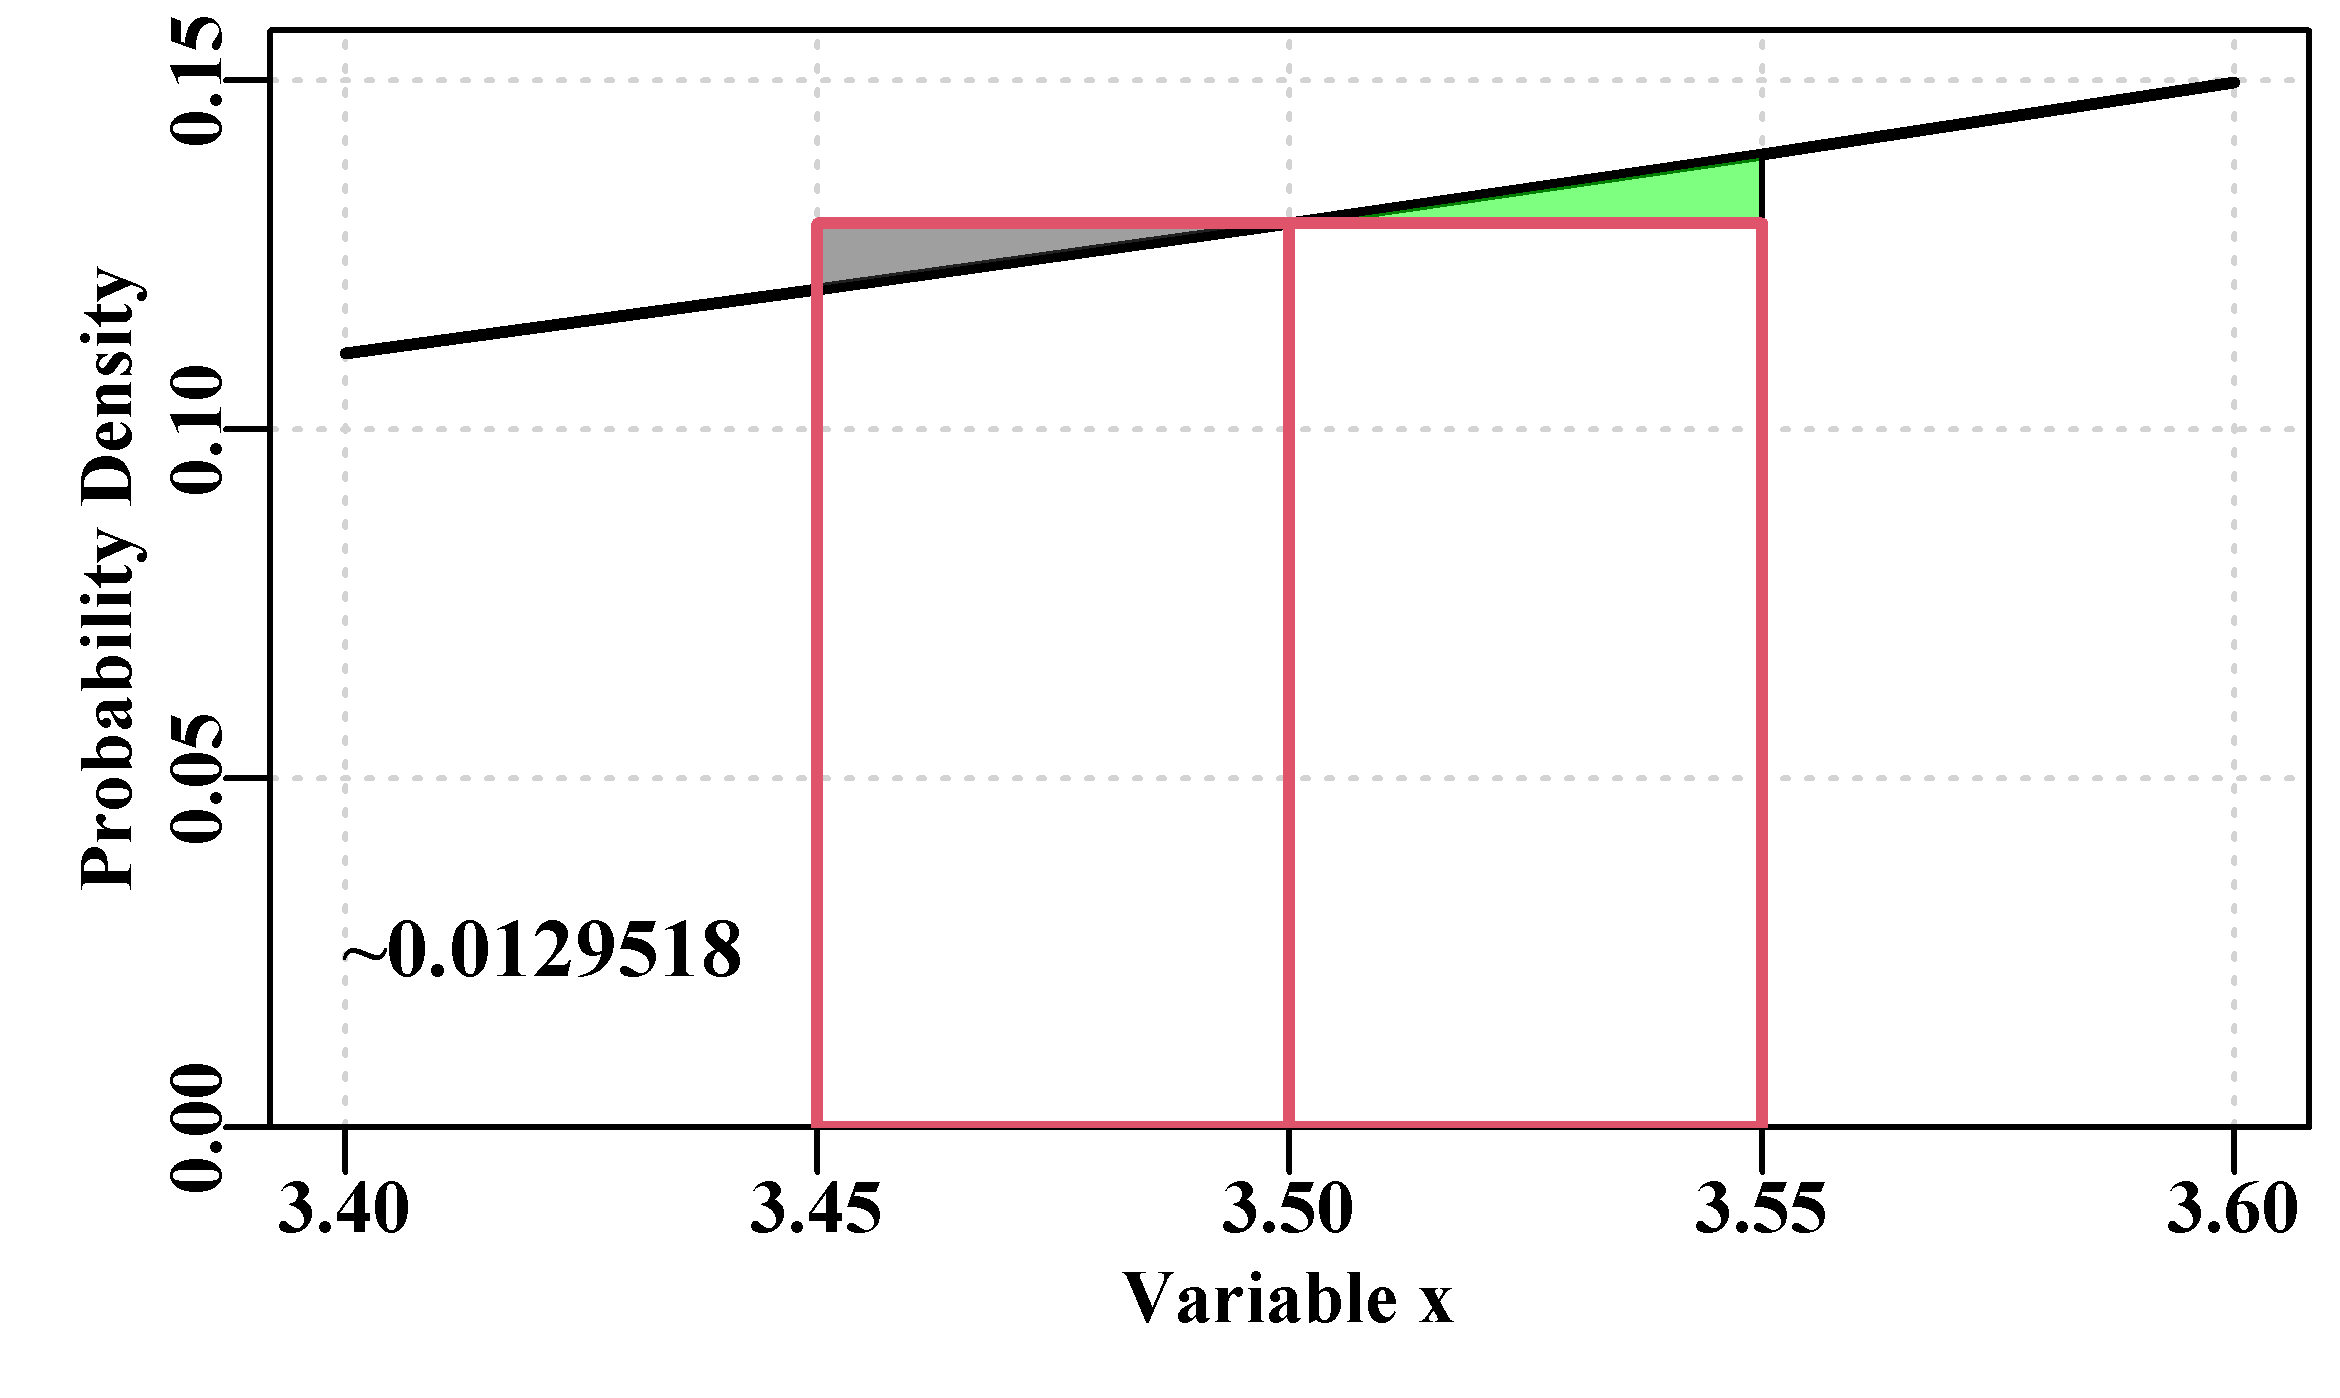 Probability densities for a normally distributed variate X, with a mean of 5.0 and a standard deviation of 1.0. The PDF value at x = 3.5 is 0.129518, so the area of the boxes outlined in red is 0.0129518, which approximates the total probability of a value between 3.45 - 3.55, which would really be the area under the curve.